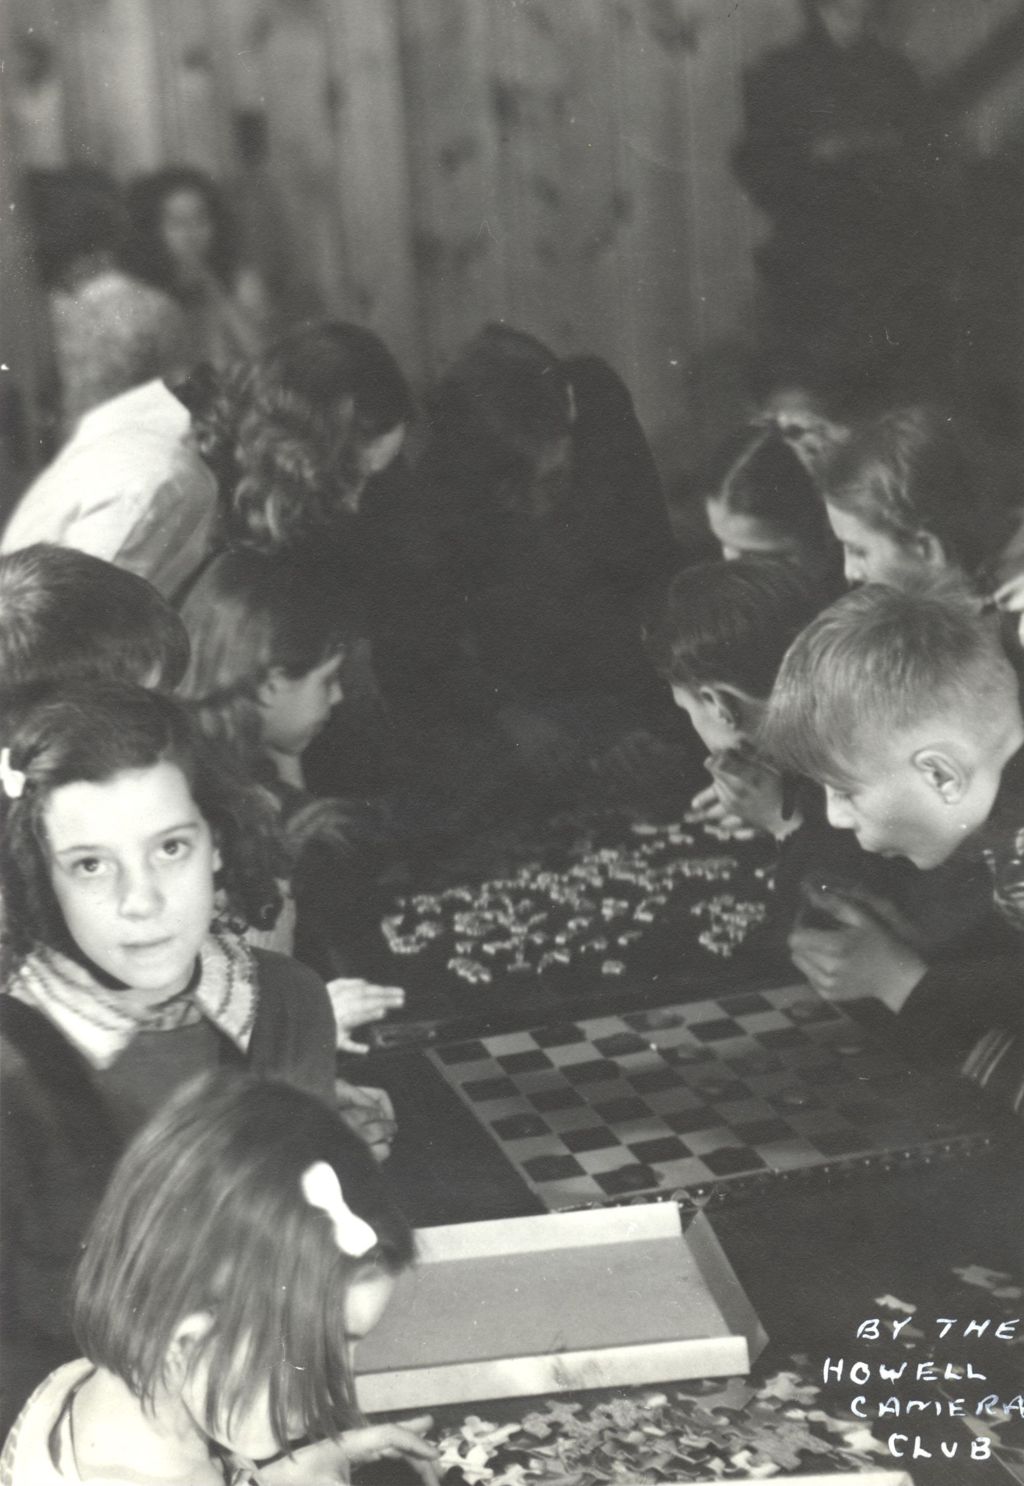 Children playing checkers and doing puzzles